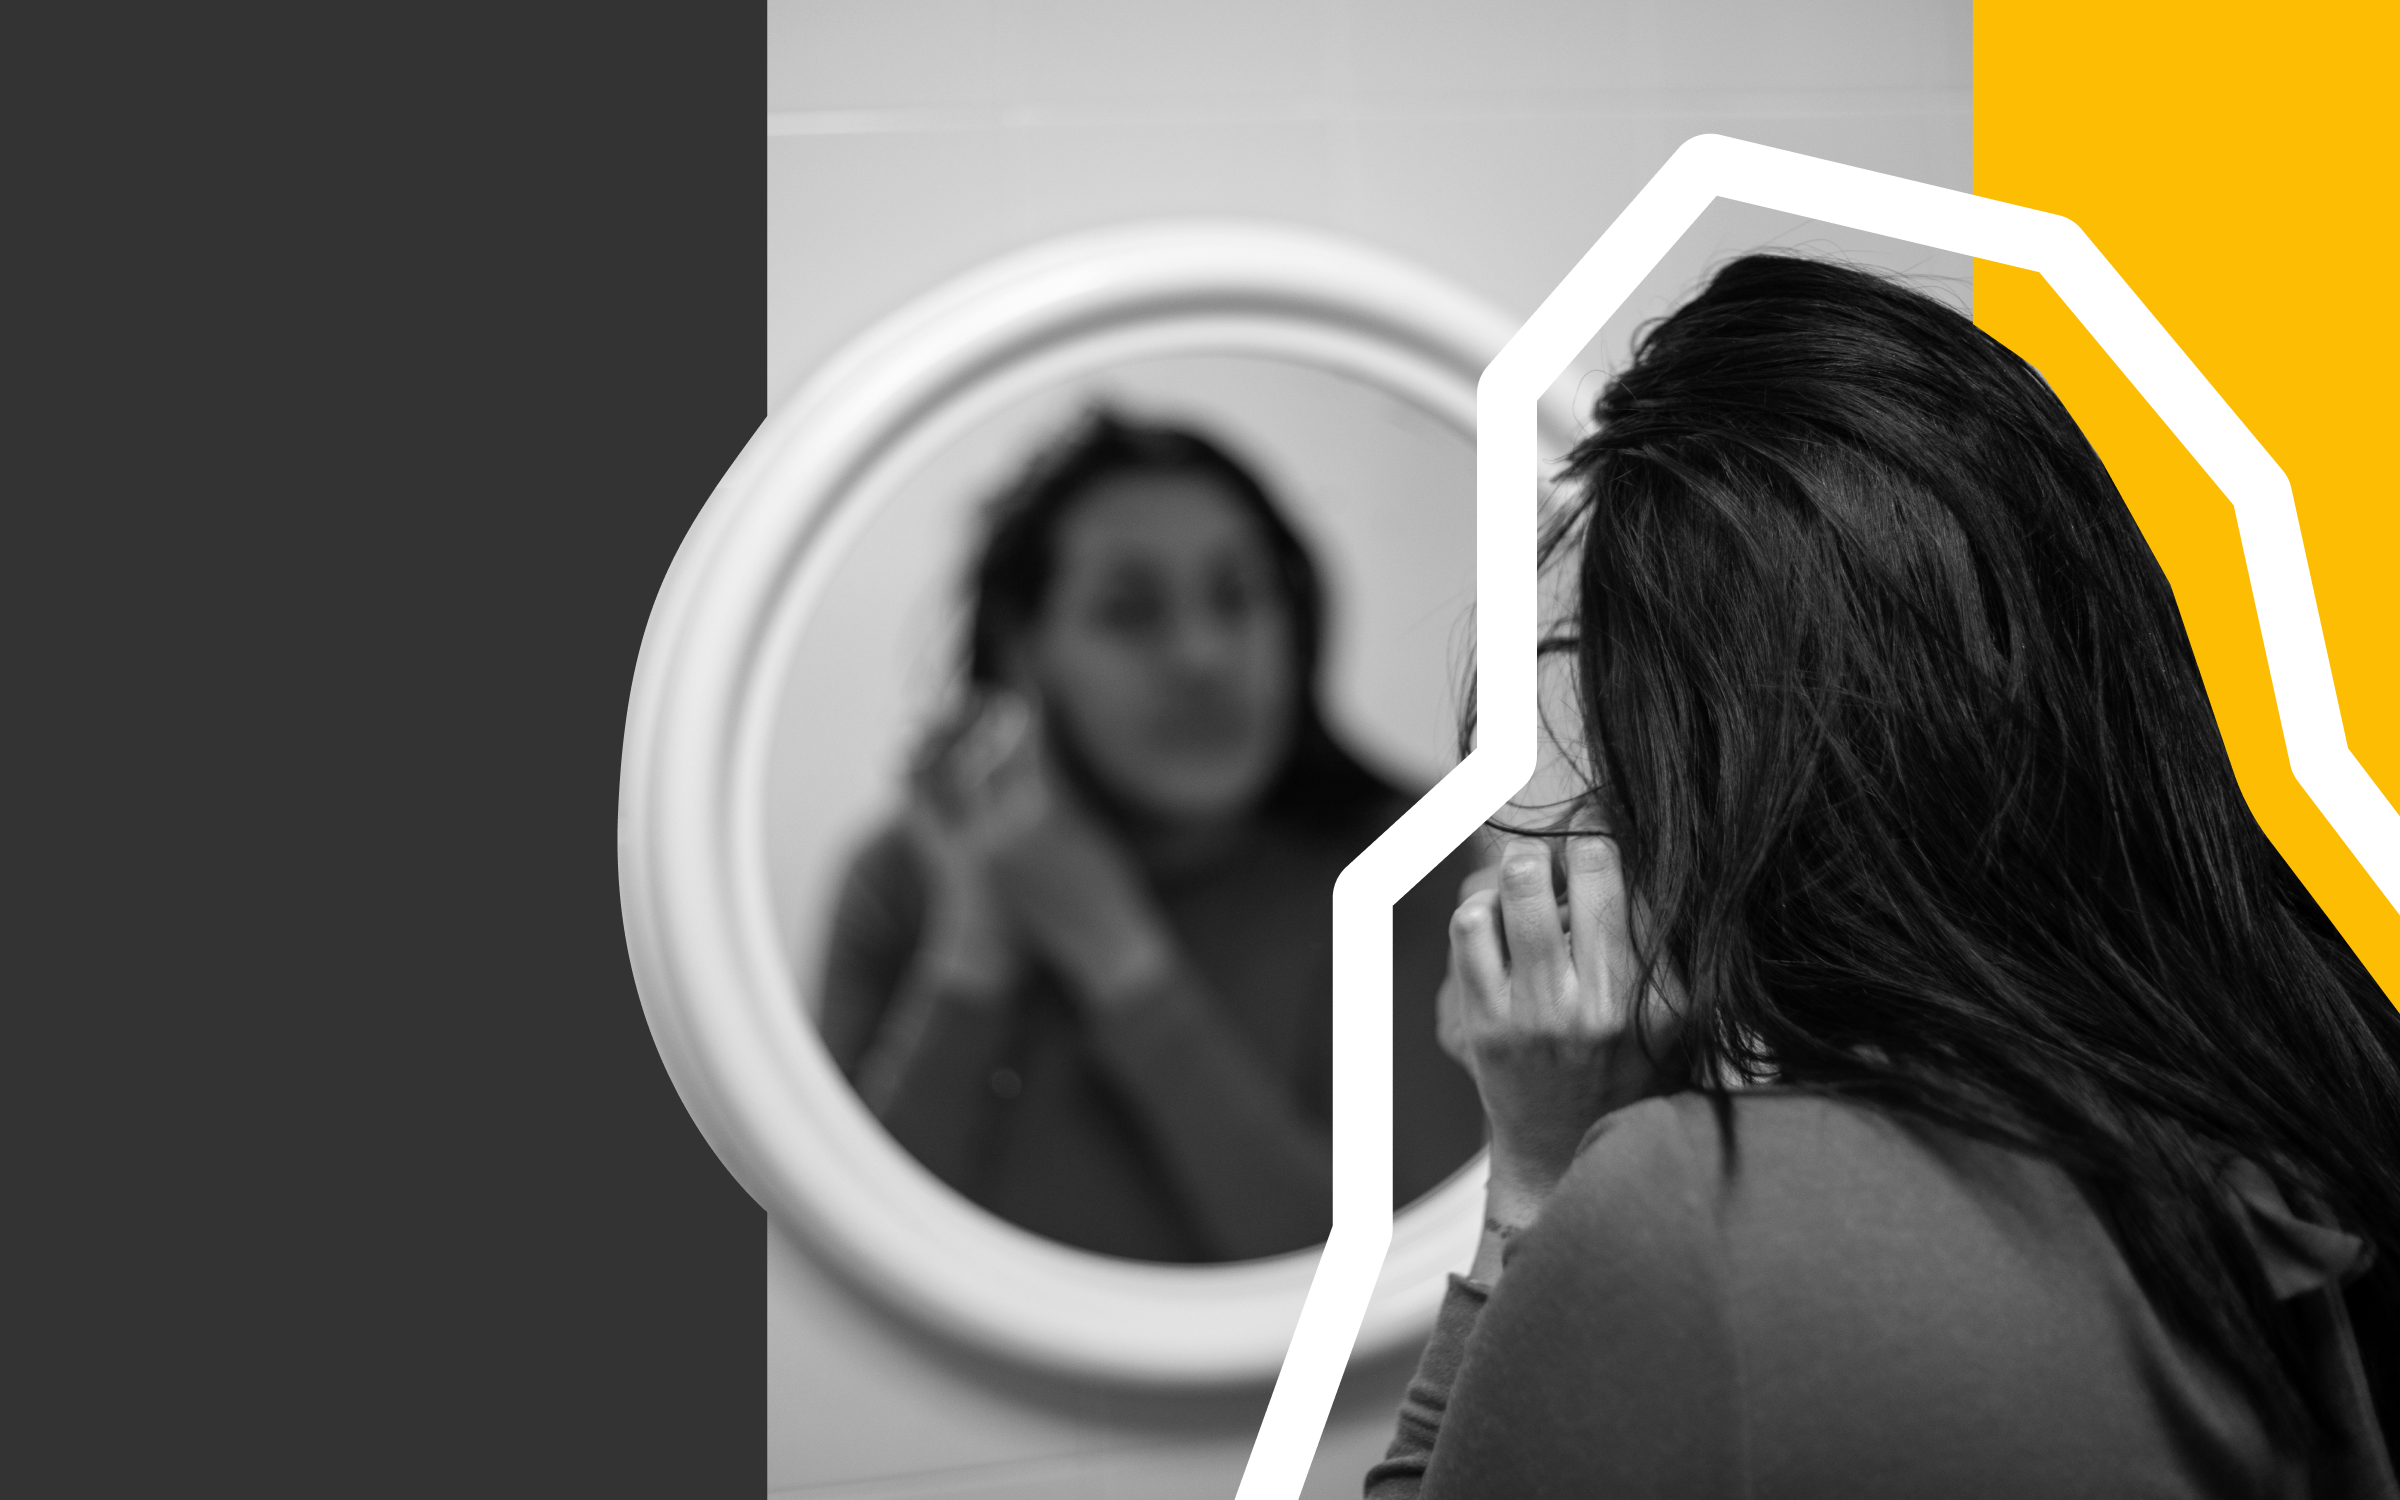 Effective reflection hero image featuring a woman looking in a mirror